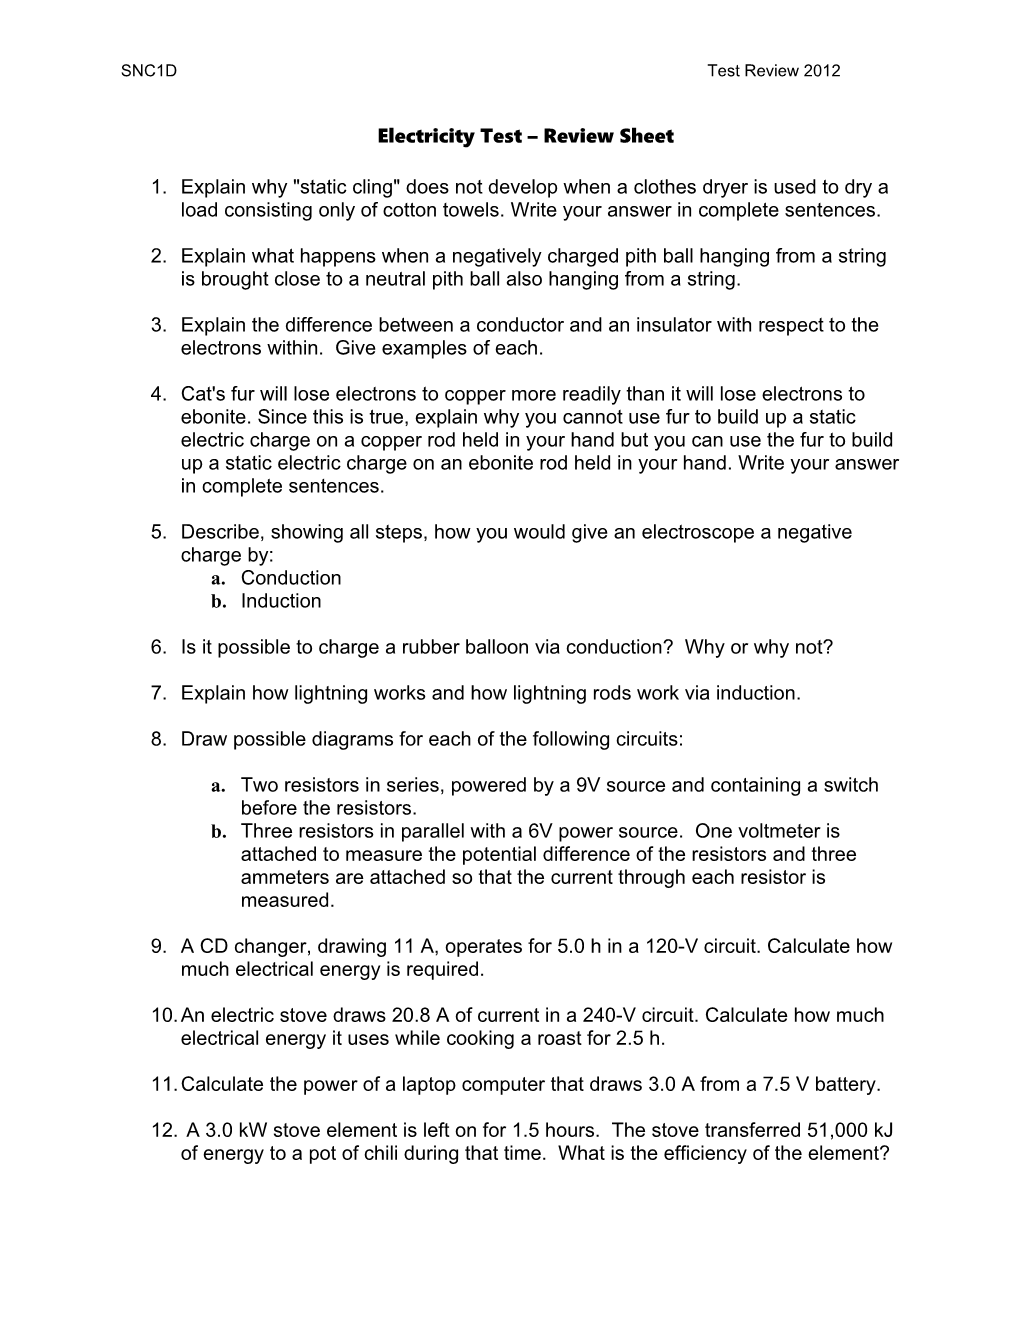 Electricity Test Review Sheet